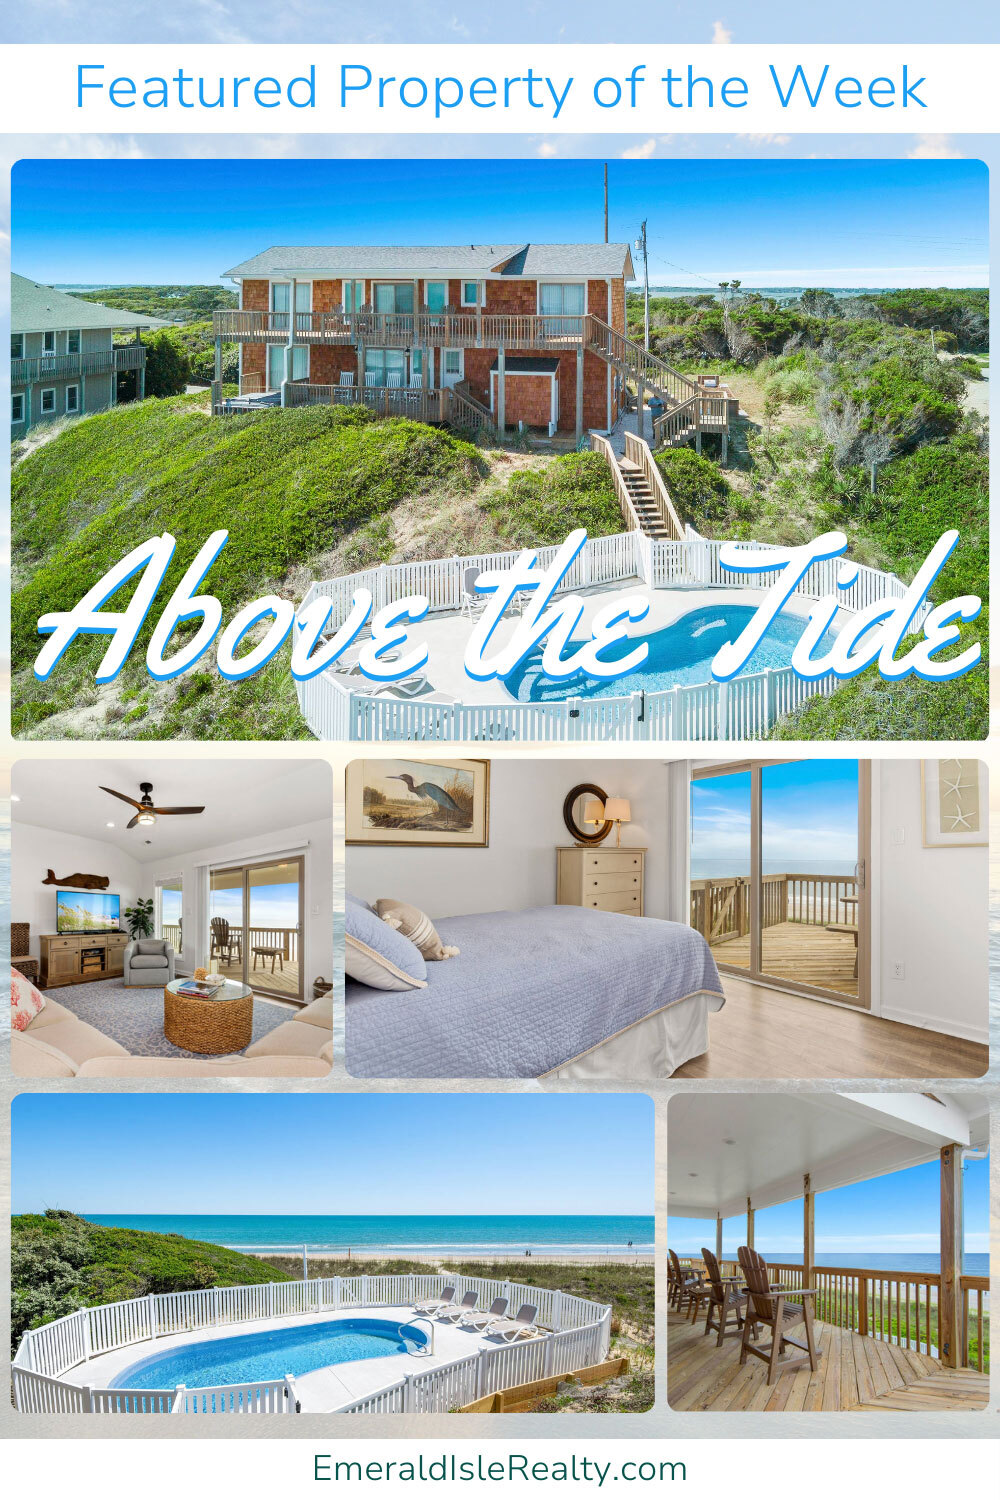 Above the Tide - Emerald Isle Realty Featured Property of the Week